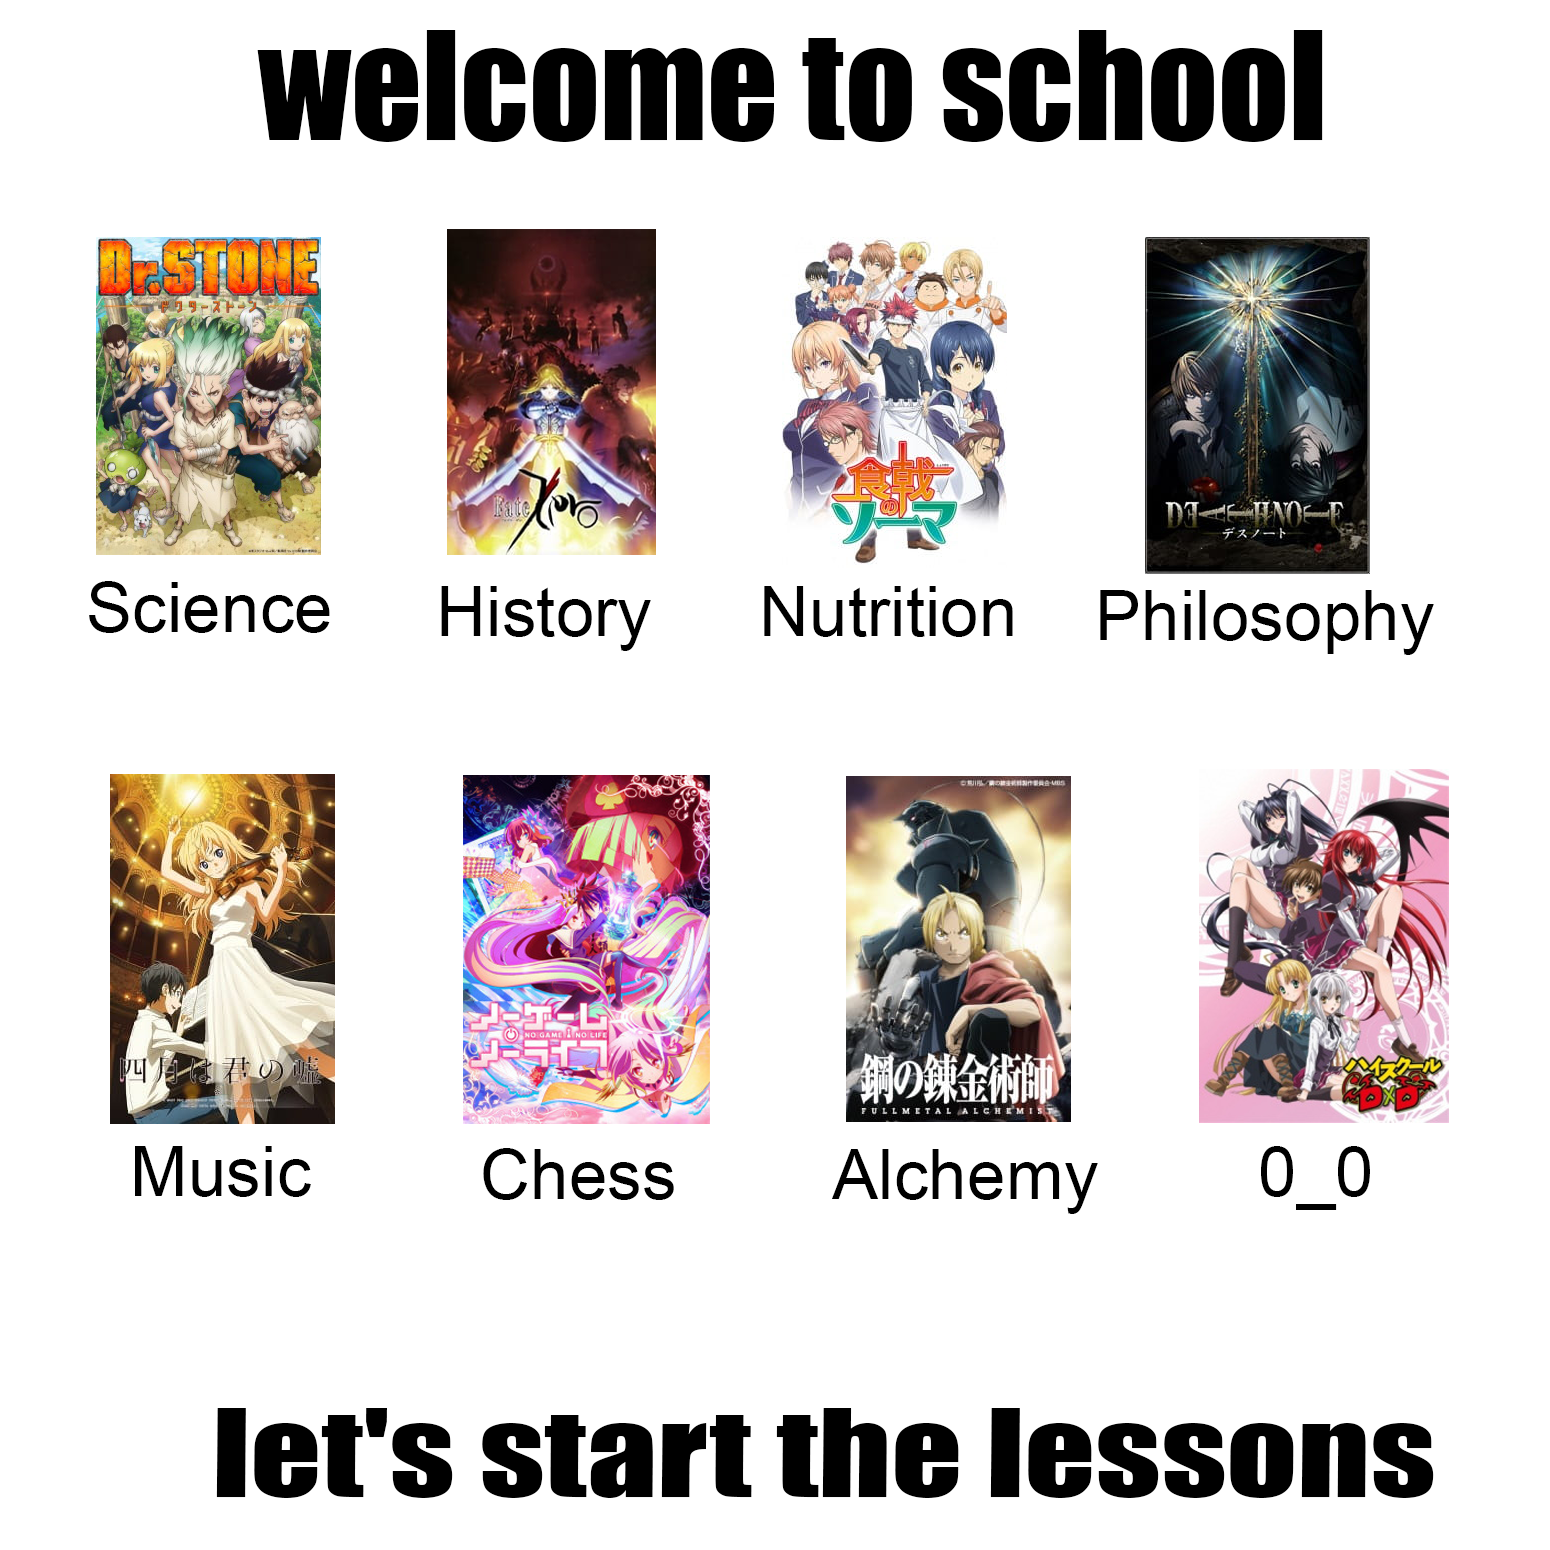 What other lessons are there?